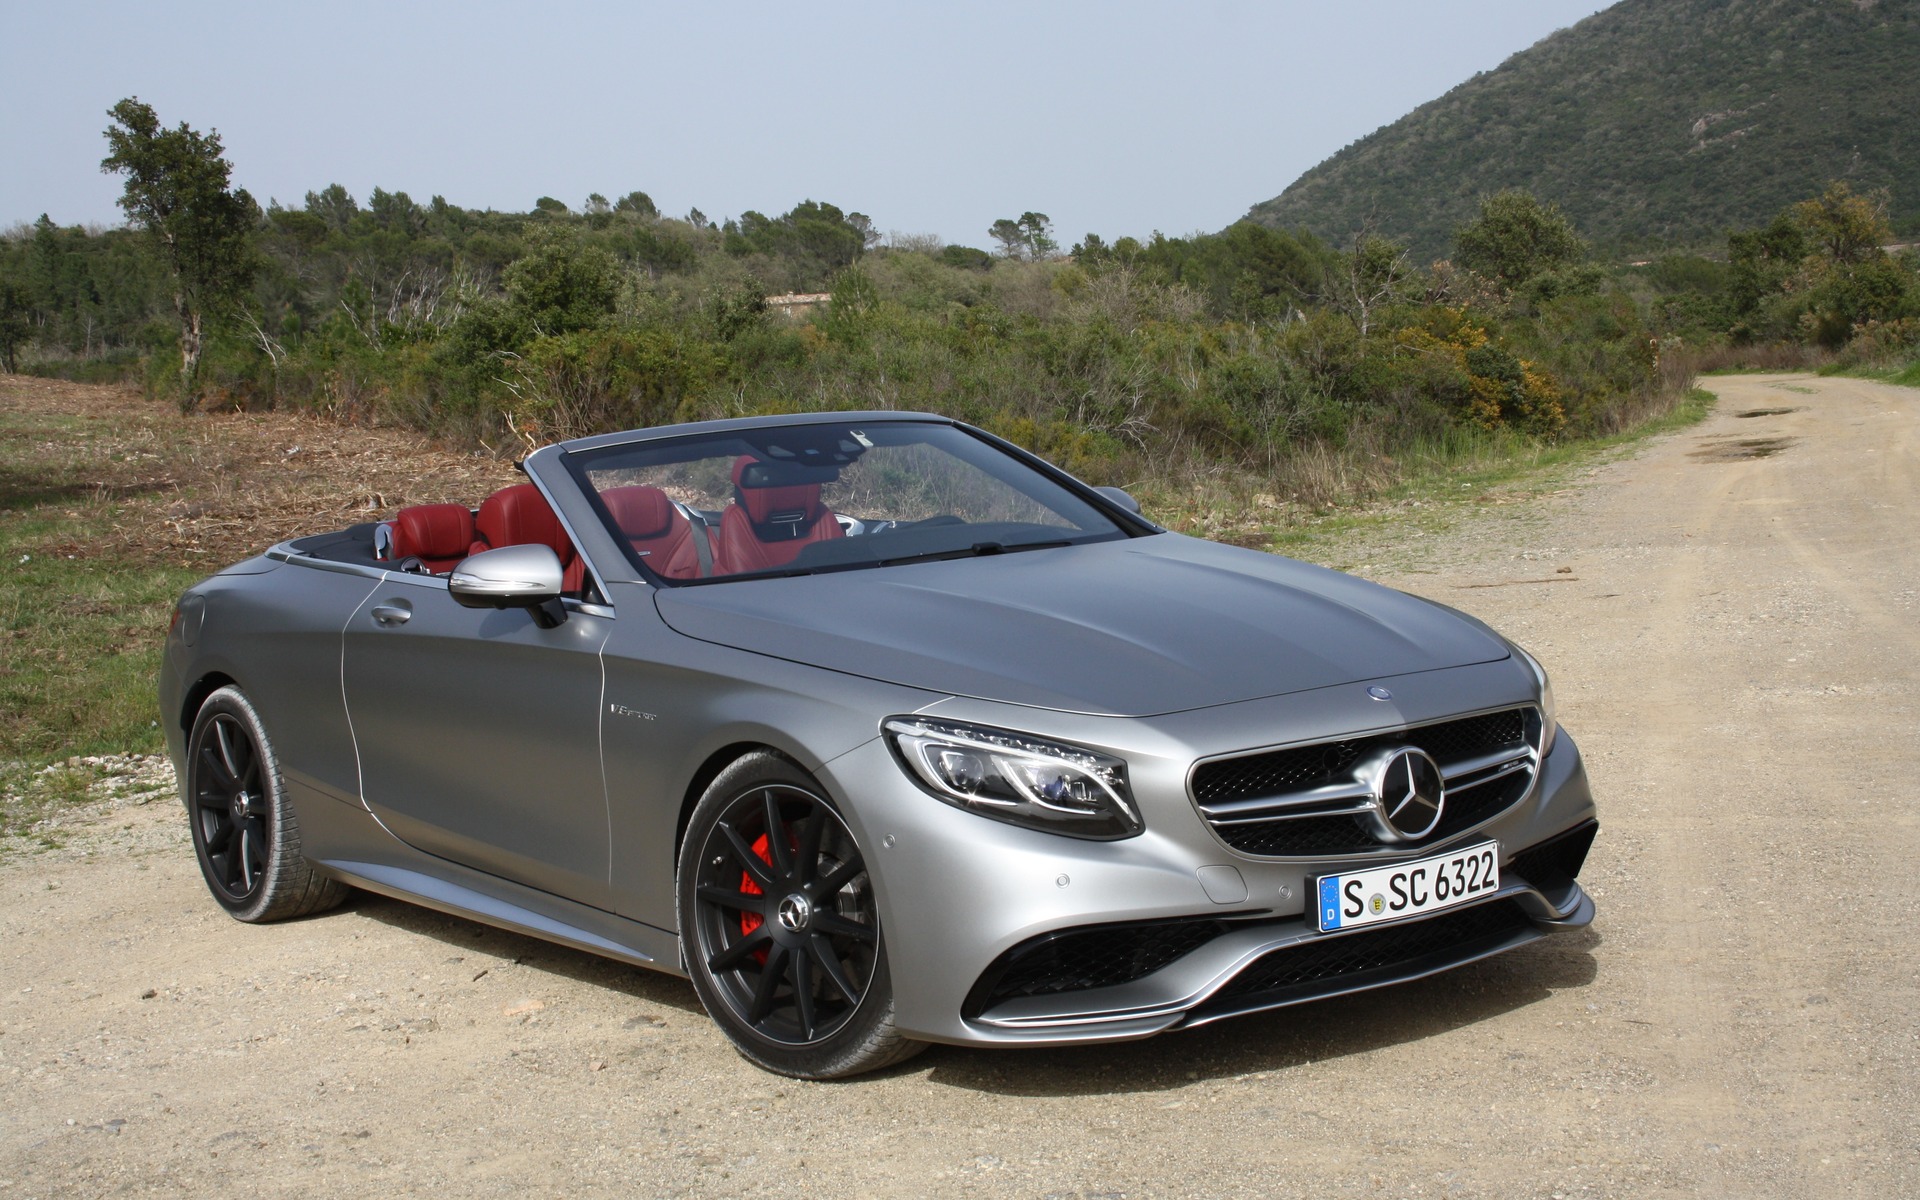 2017 Mercedes-Benz S-Class Cabriolet: When Too Much Isn’t Enough - The